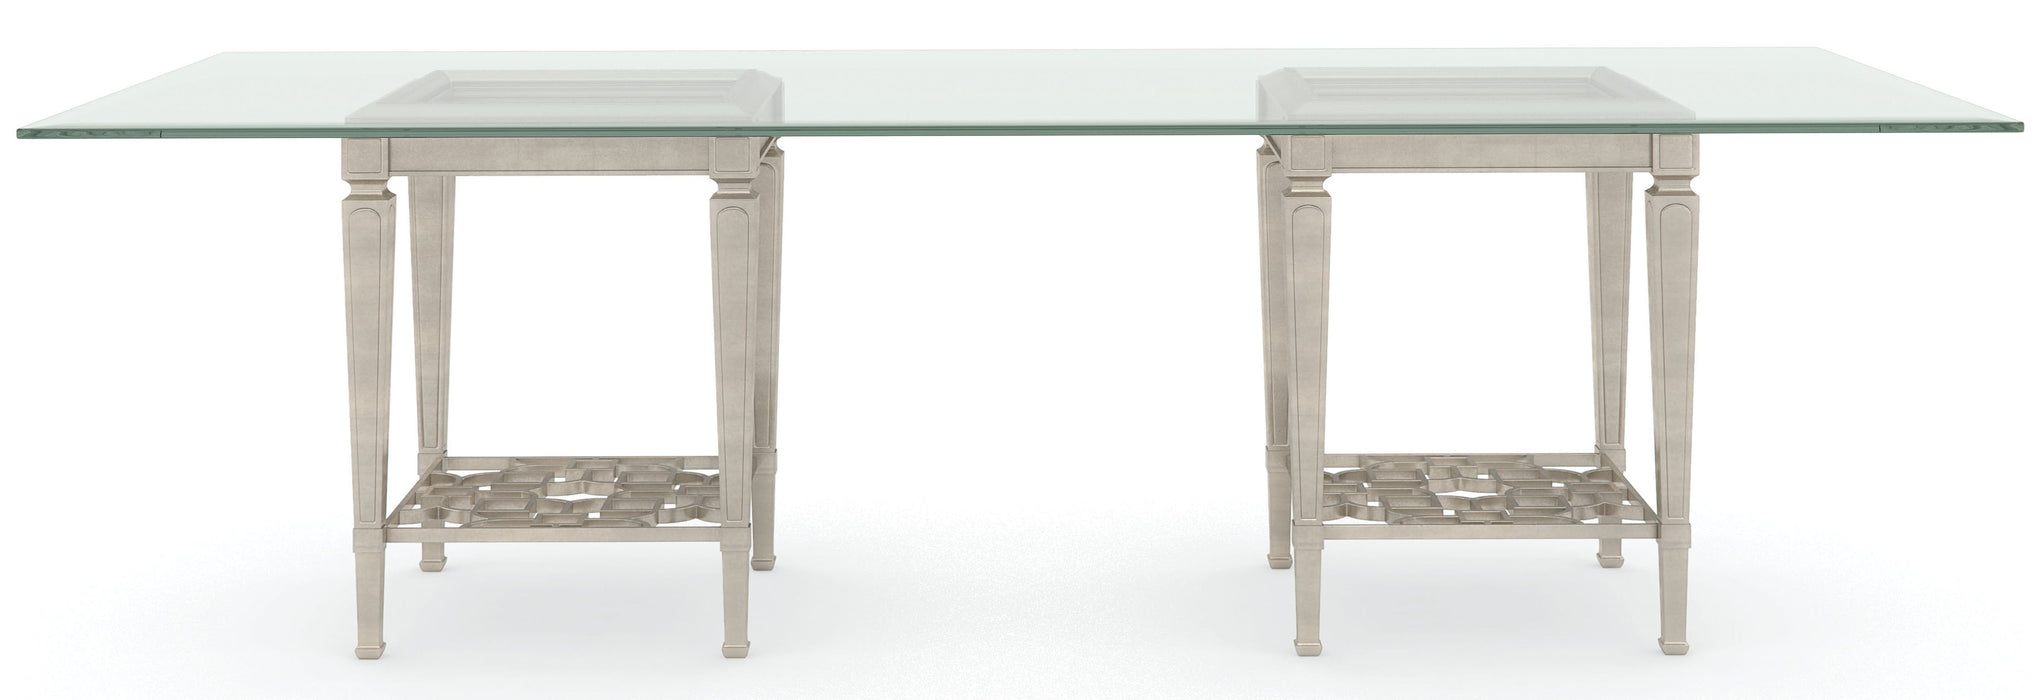 Caracole Classic A Social Event Rectangular Dining Table